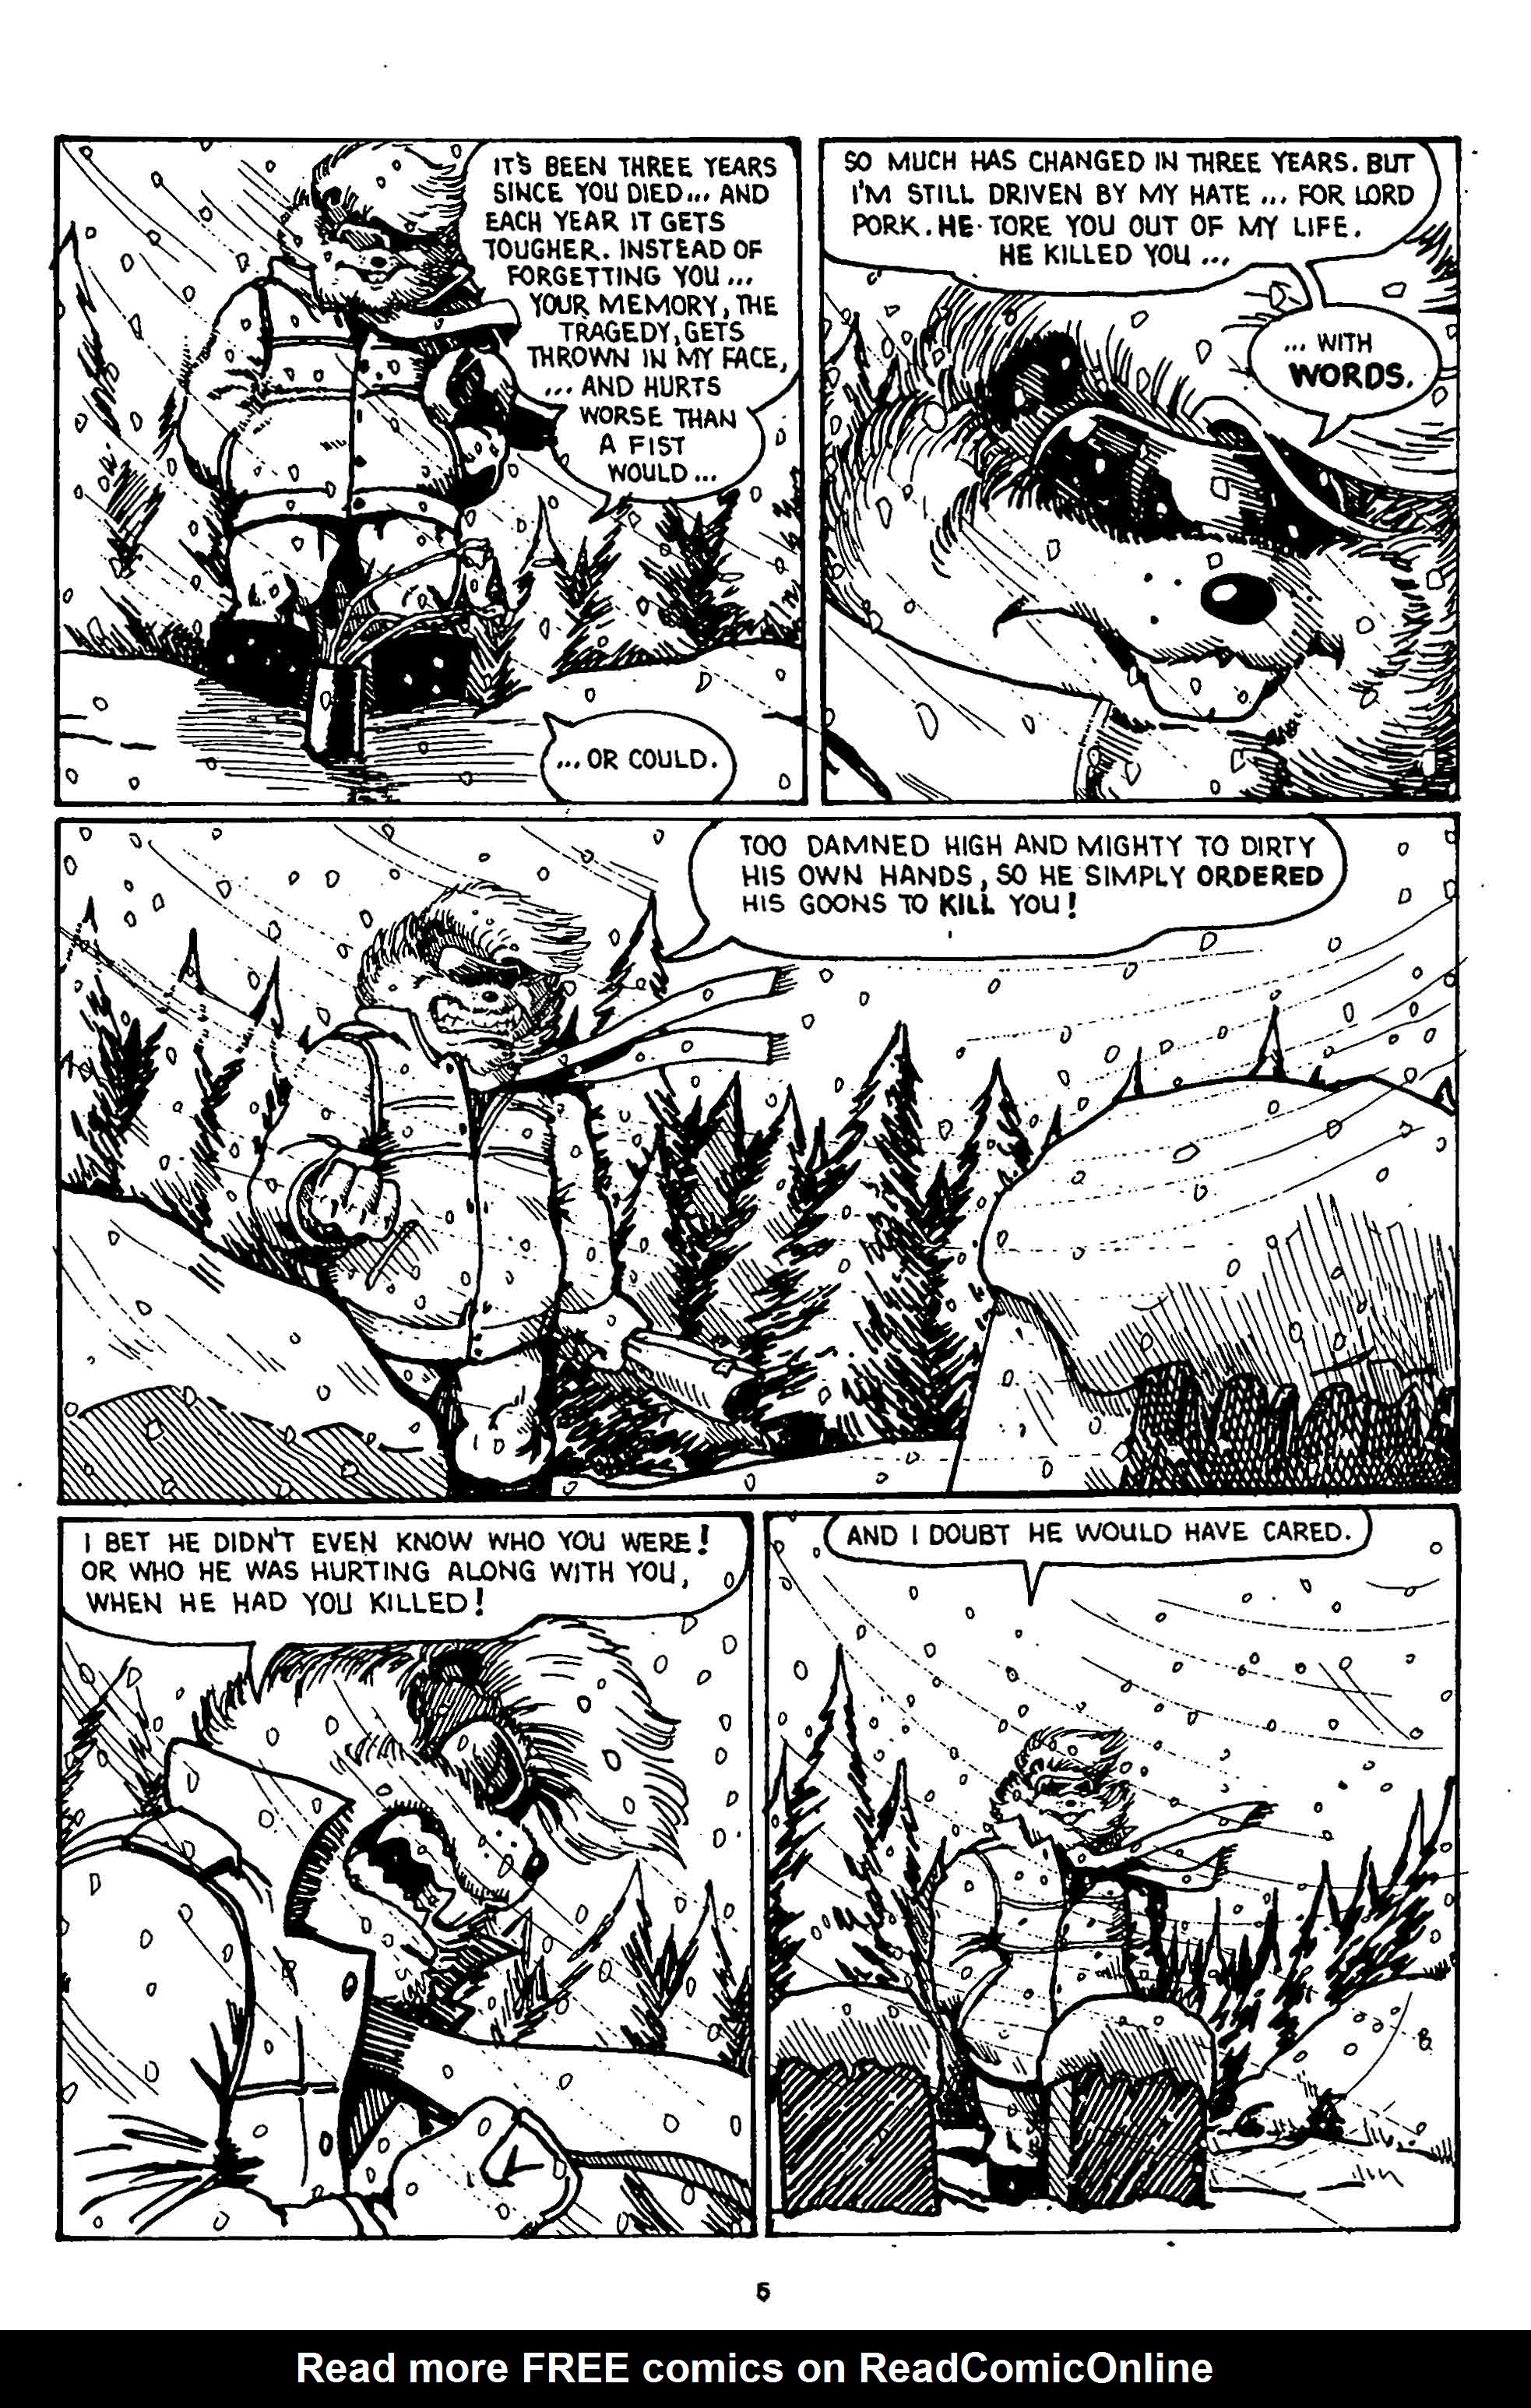 Read online Space Beaver comic -  Issue #8 - 7